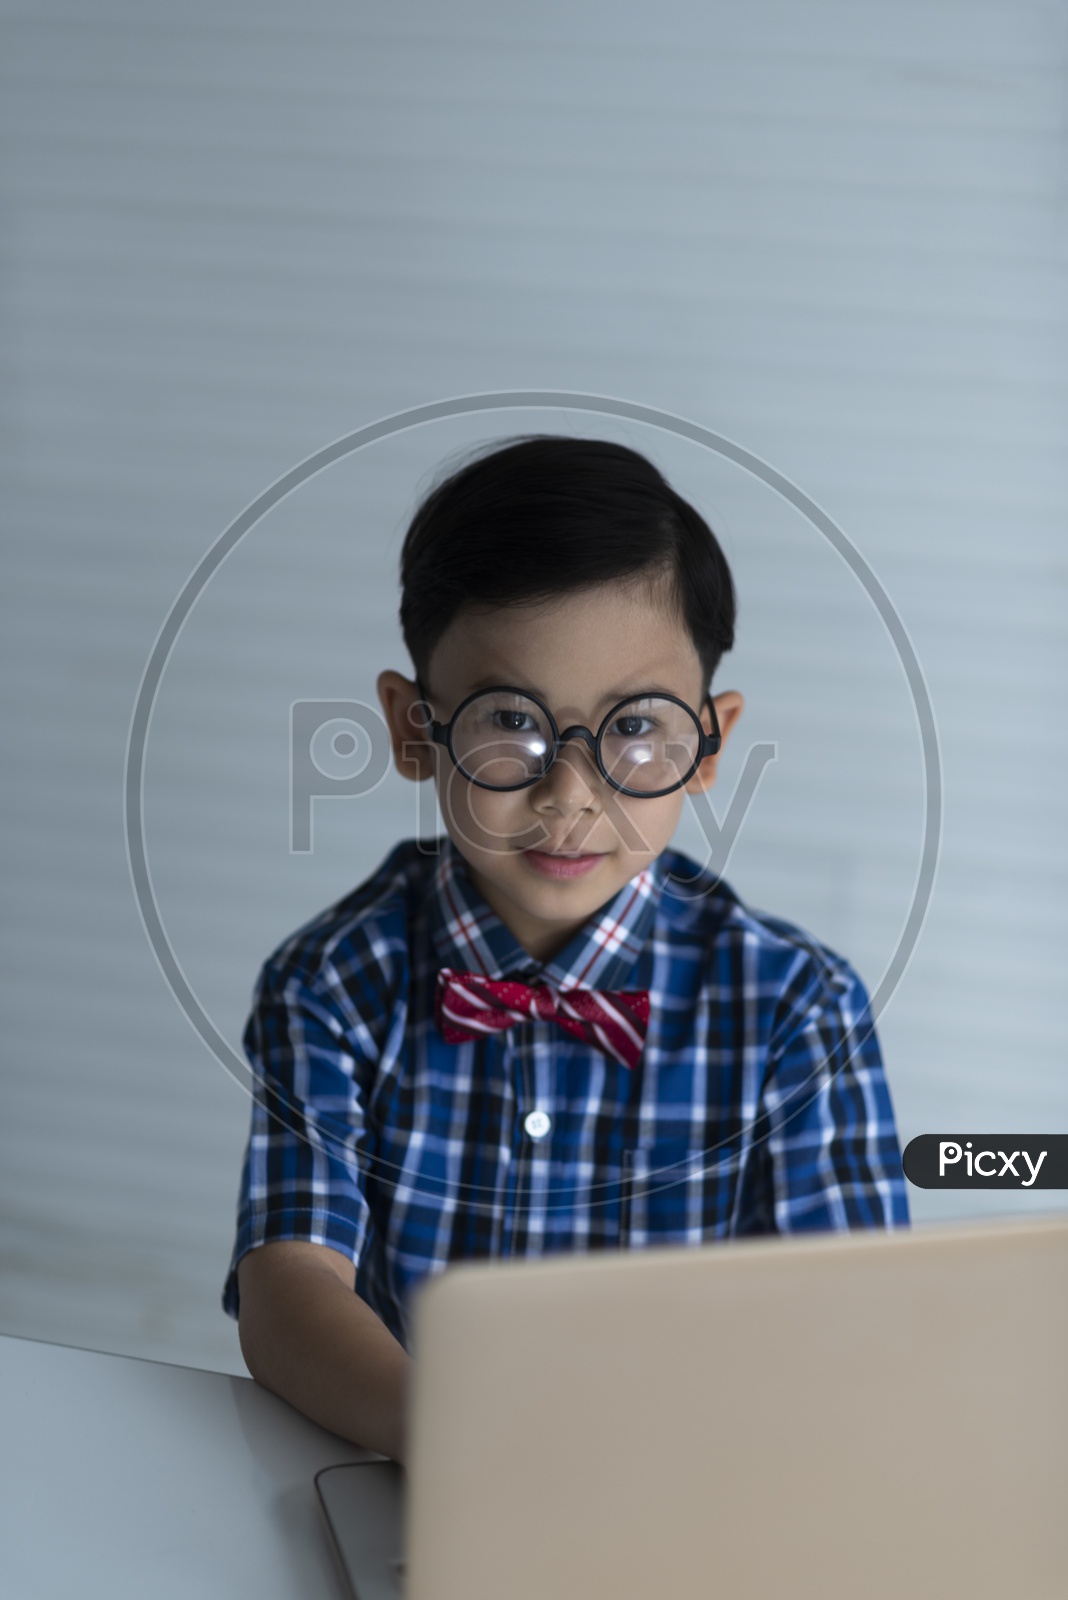 A Young Decent Thai Boy Or Child Student With A Laptop On Study Table And Posing